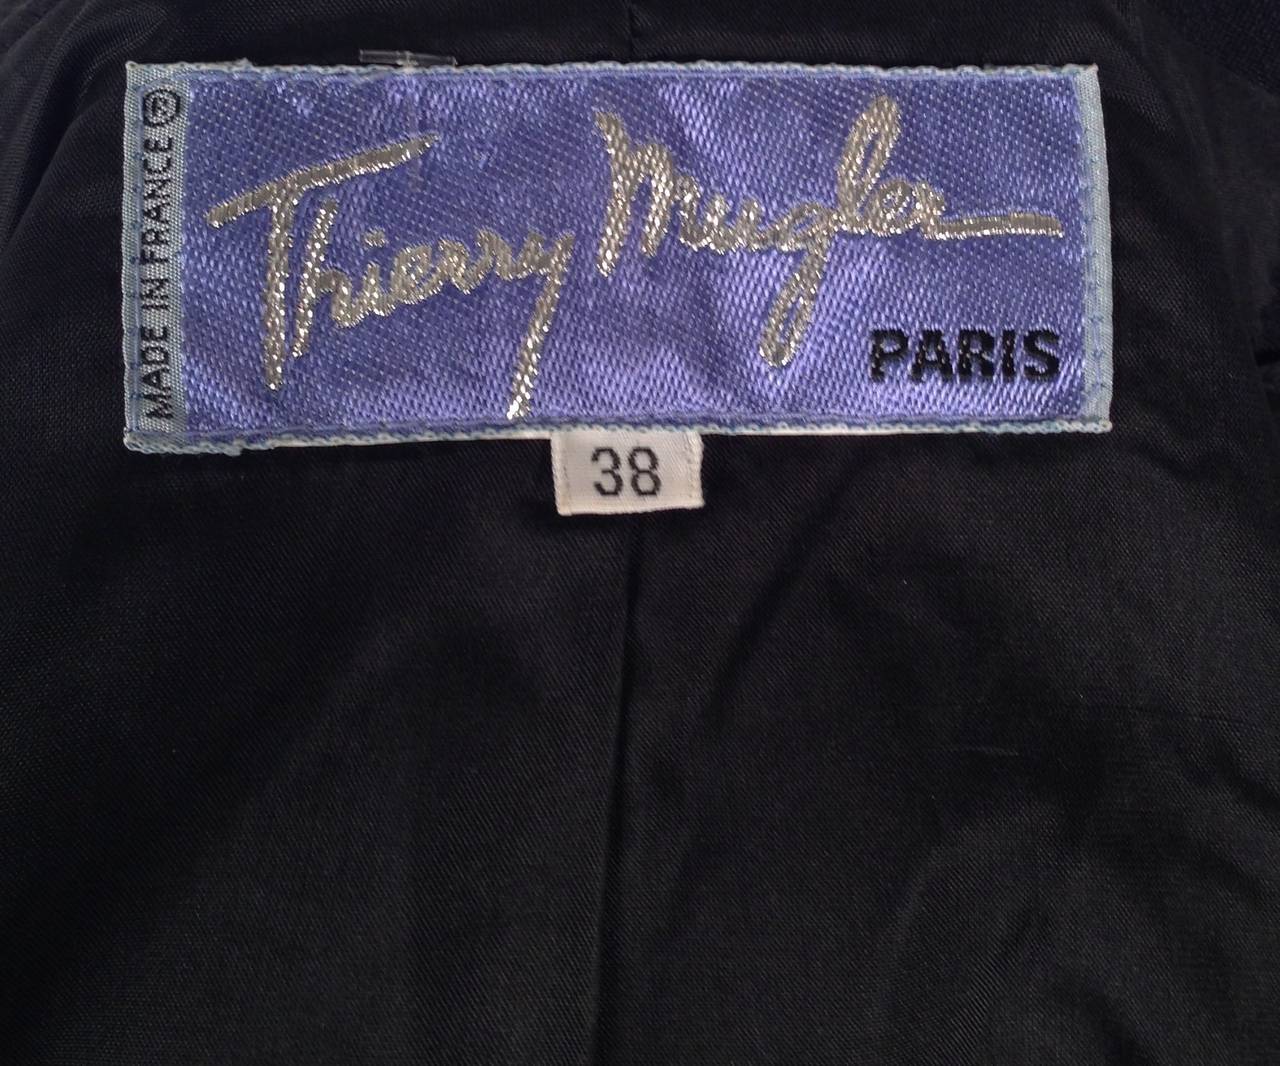 Vintage Thierry Mugler Black Suit With Corseted Jacket For Sale 4